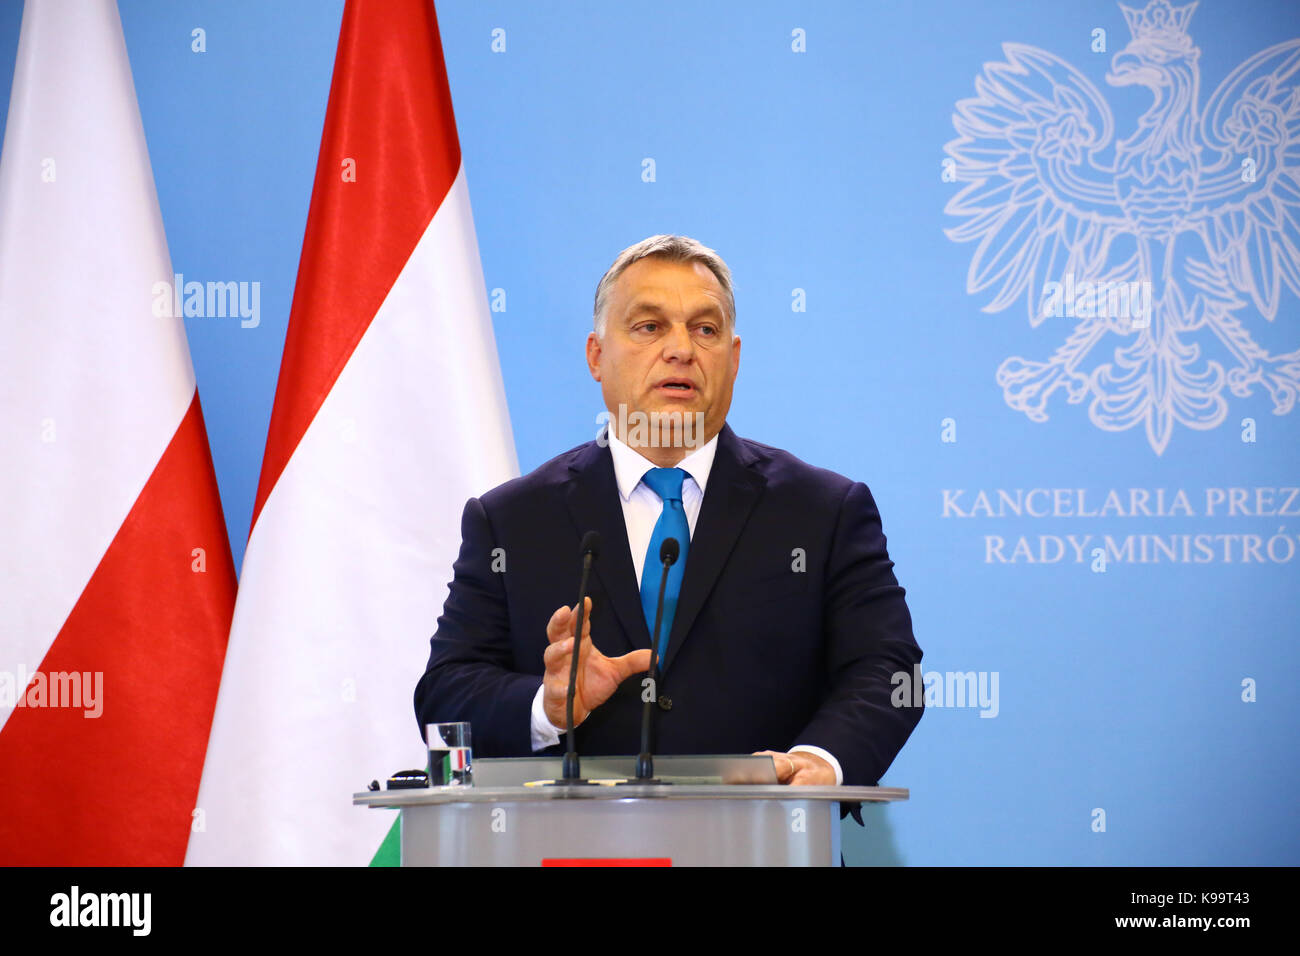 Poland, Warsaw, 22th September 2017:  Primer Beata Szydlo held joint press statement with Hungarian Prime Minister Viktor Orban in Warsaw's chancellery. ©Jake Ratz/Alamy Live News Stock Photo